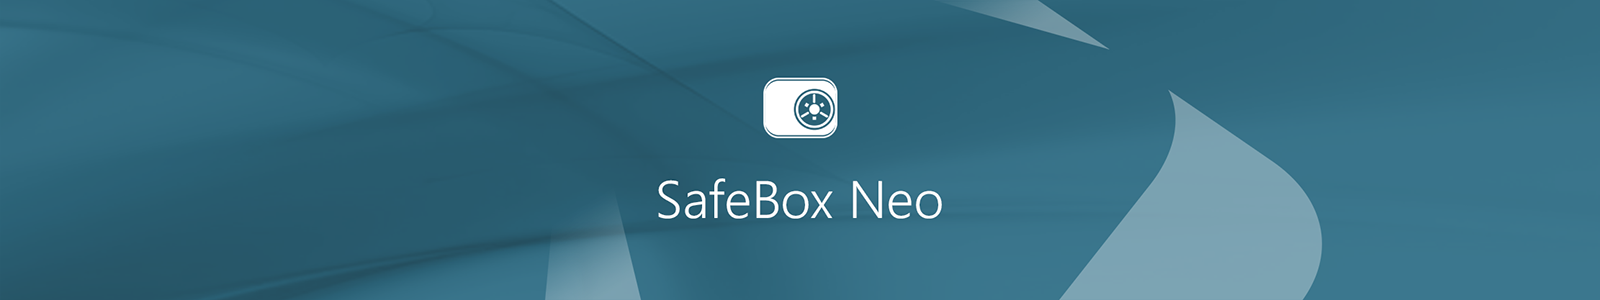 SafeBox Neo banner